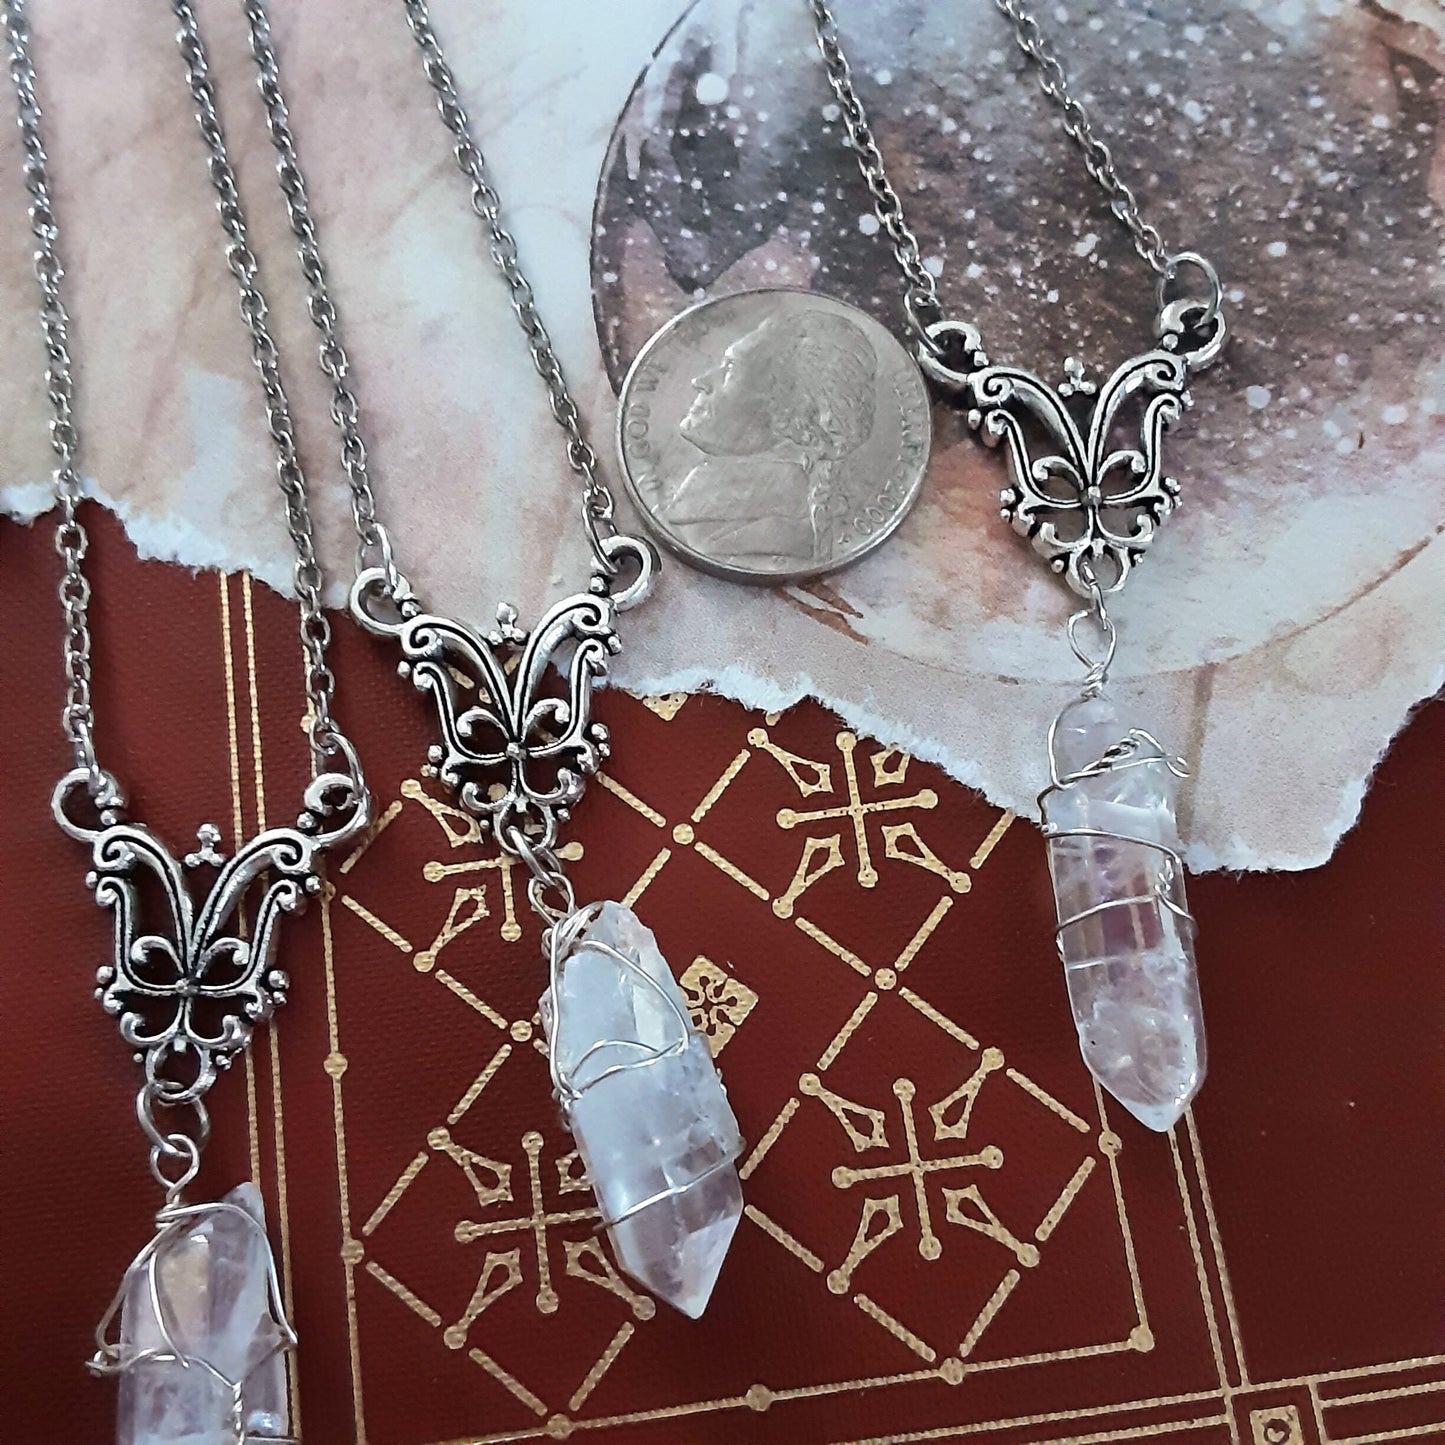 Crystal Quartz Necklace, Fairy core Jewelry, Good Vibes Crystal, Ethereal, Dainty Gem Necklace, Gift idea